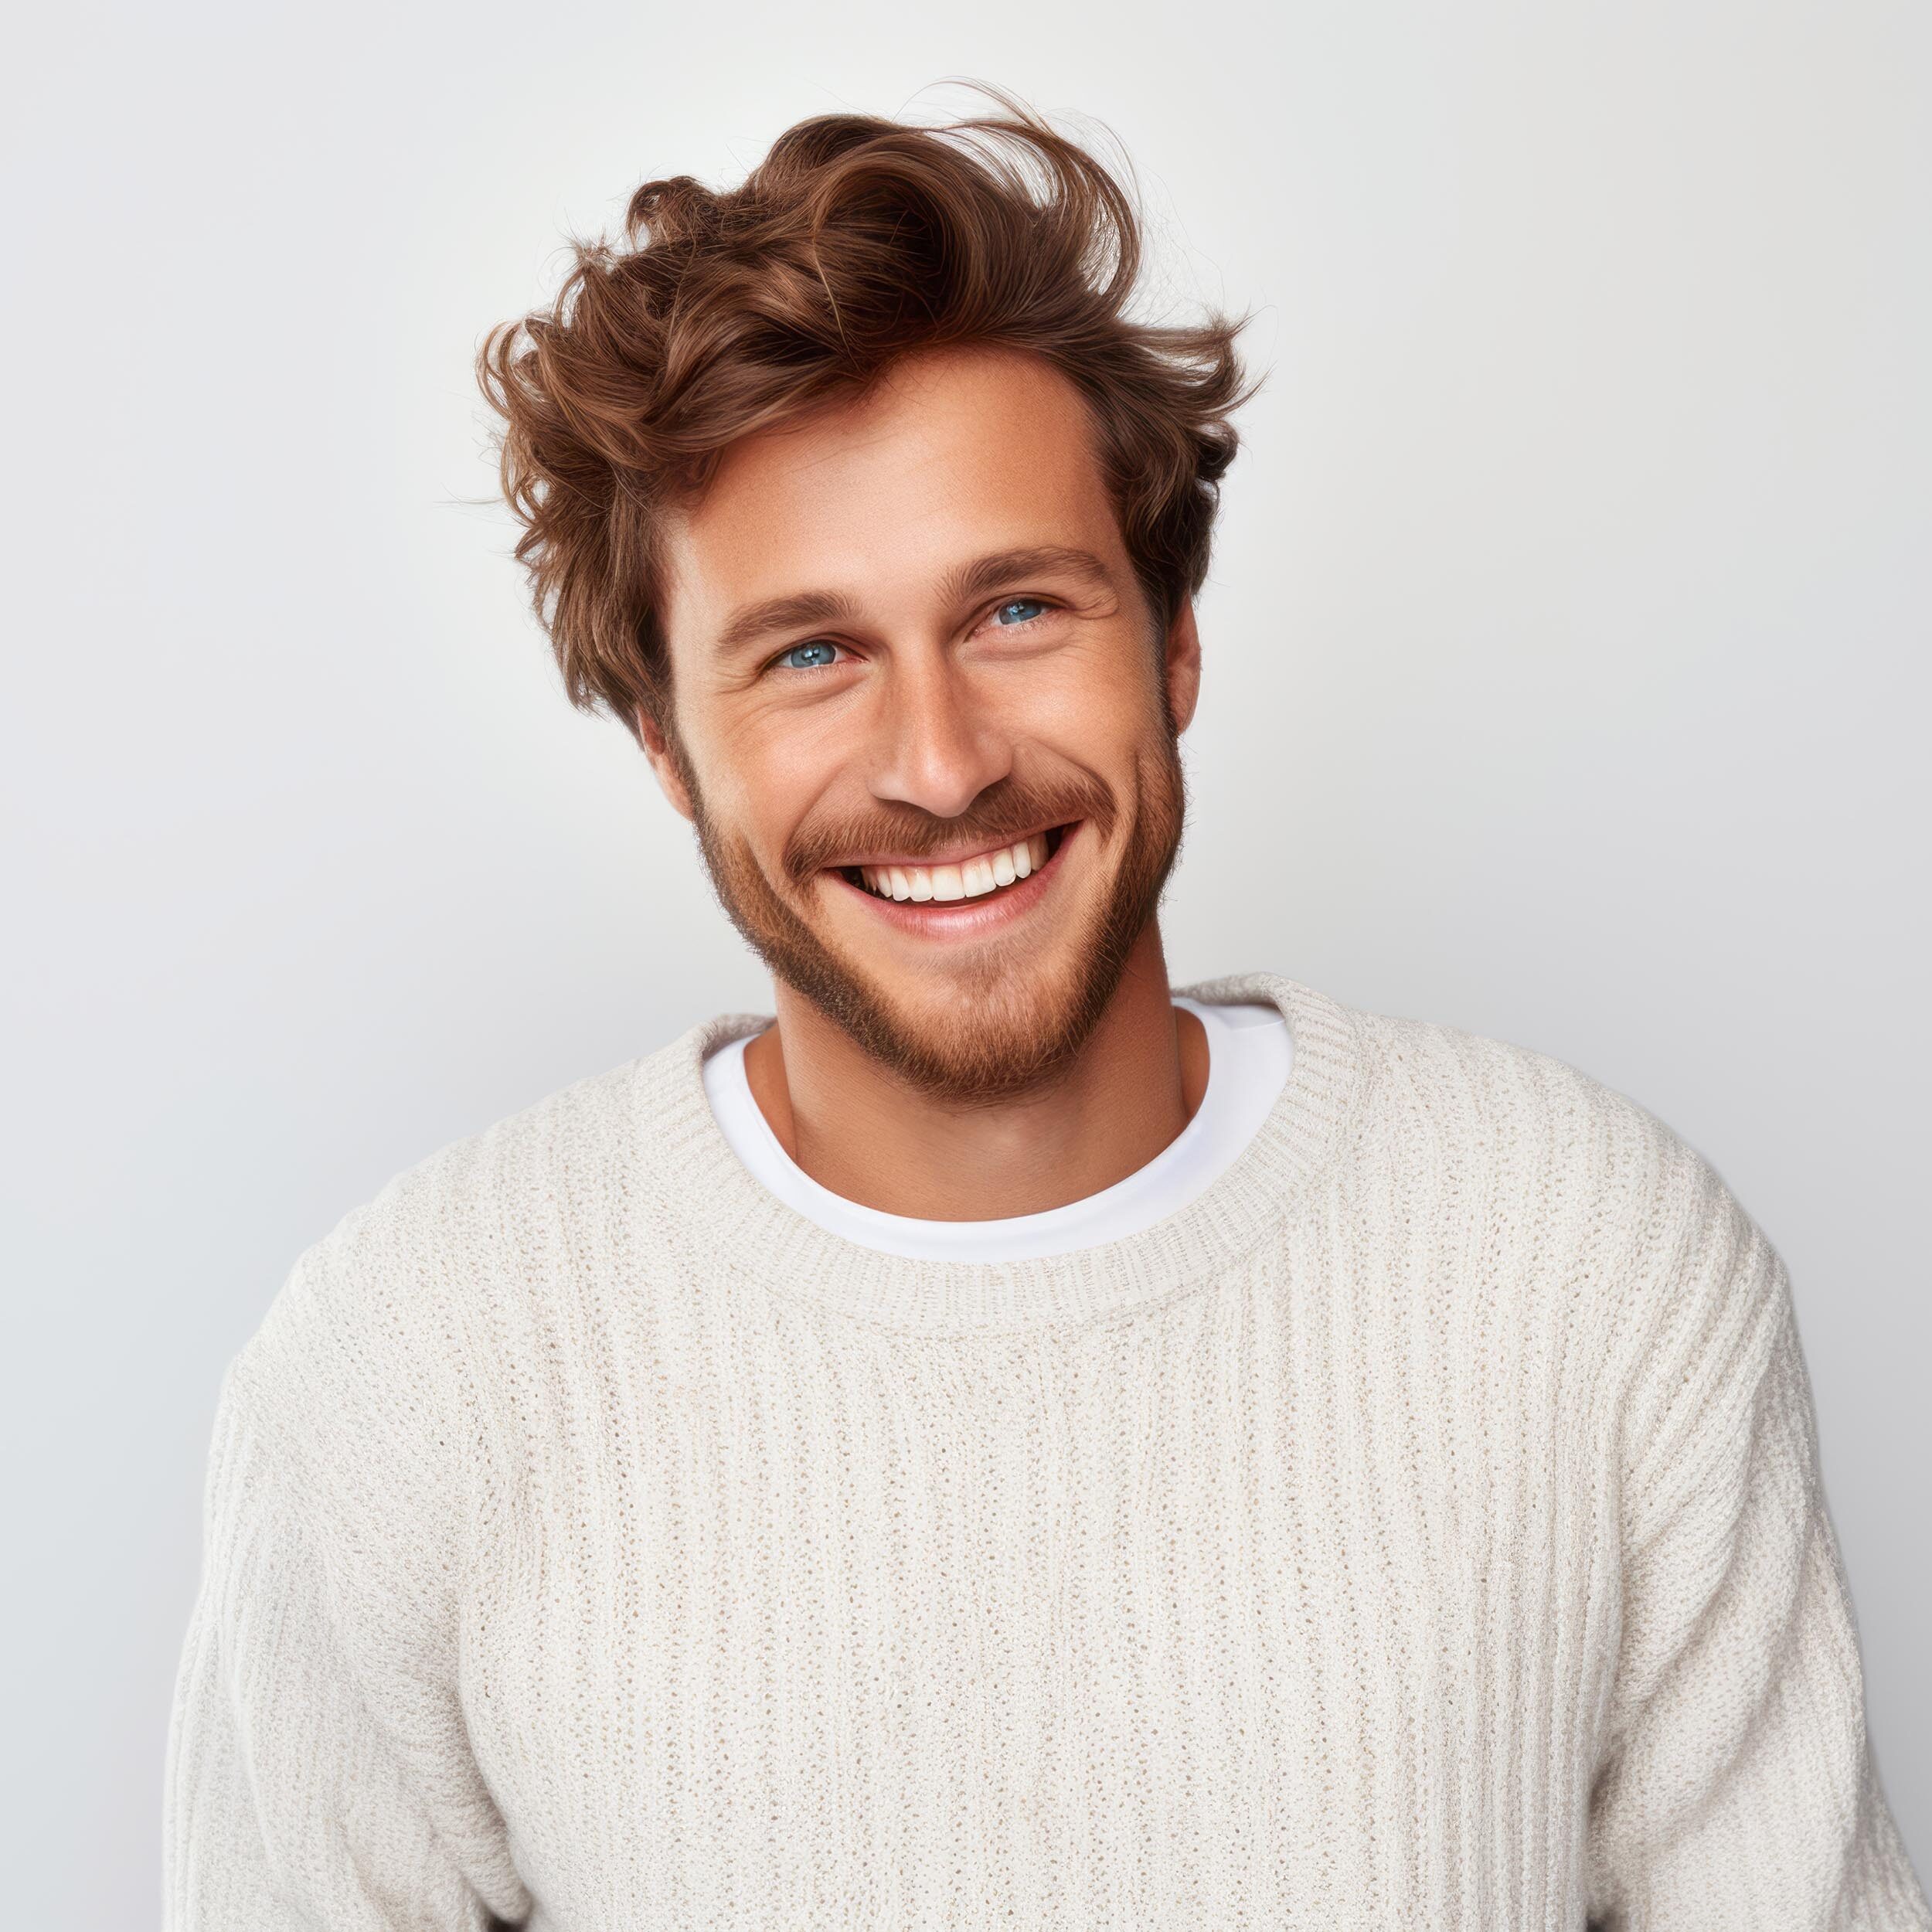 Man with brown hair and a white sweater sporting a bright, engaging smile.